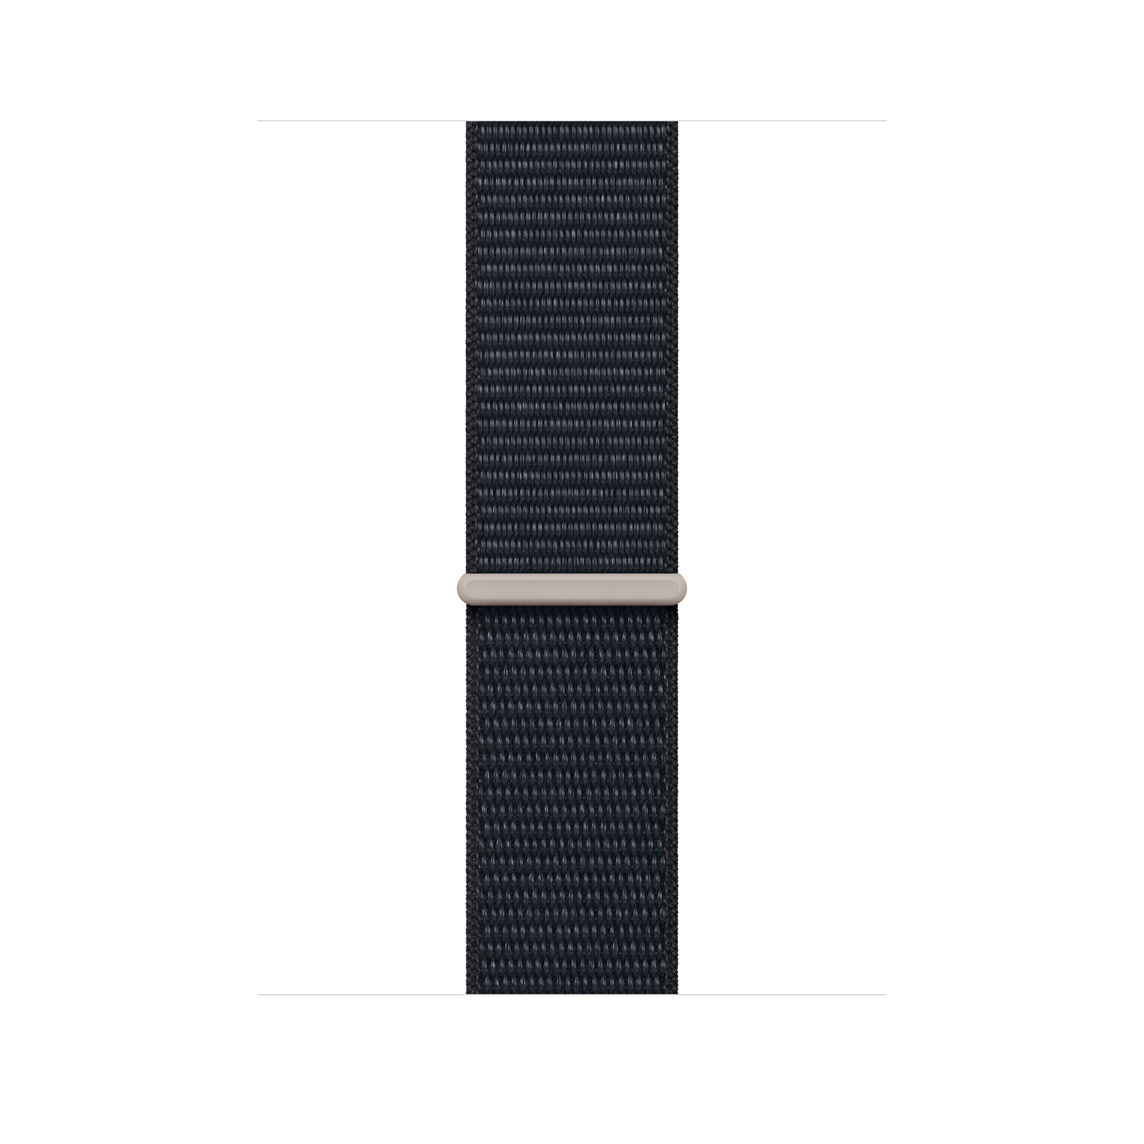 Midnight Sport Loop strap, dark blue woven nylon with light blue and brown stripes, hook-and-loop fastener